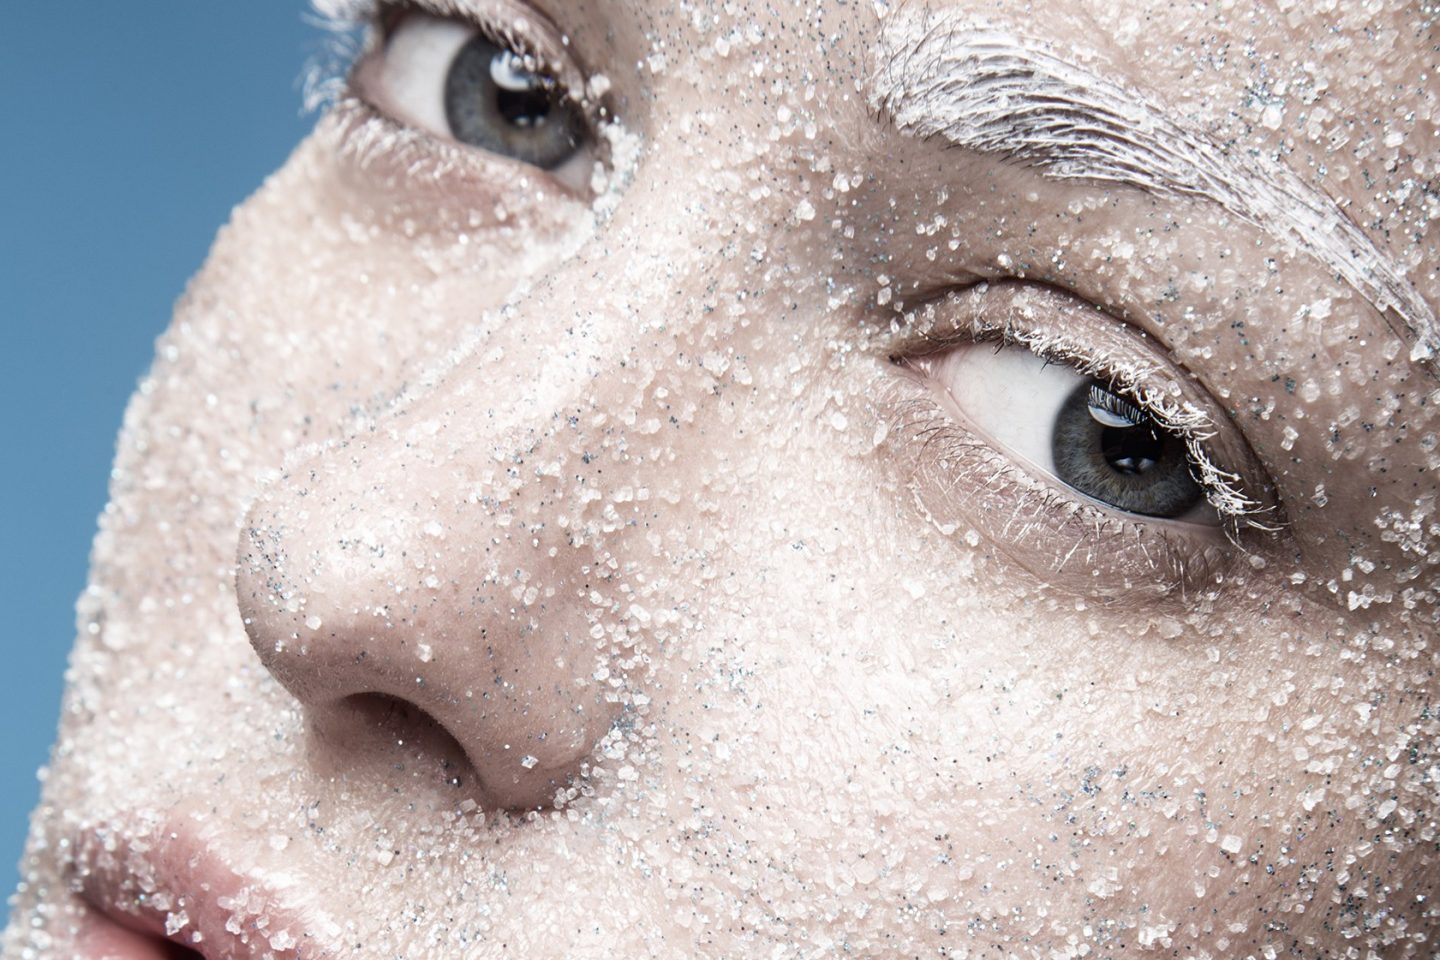 Don't over exfoliate your skin